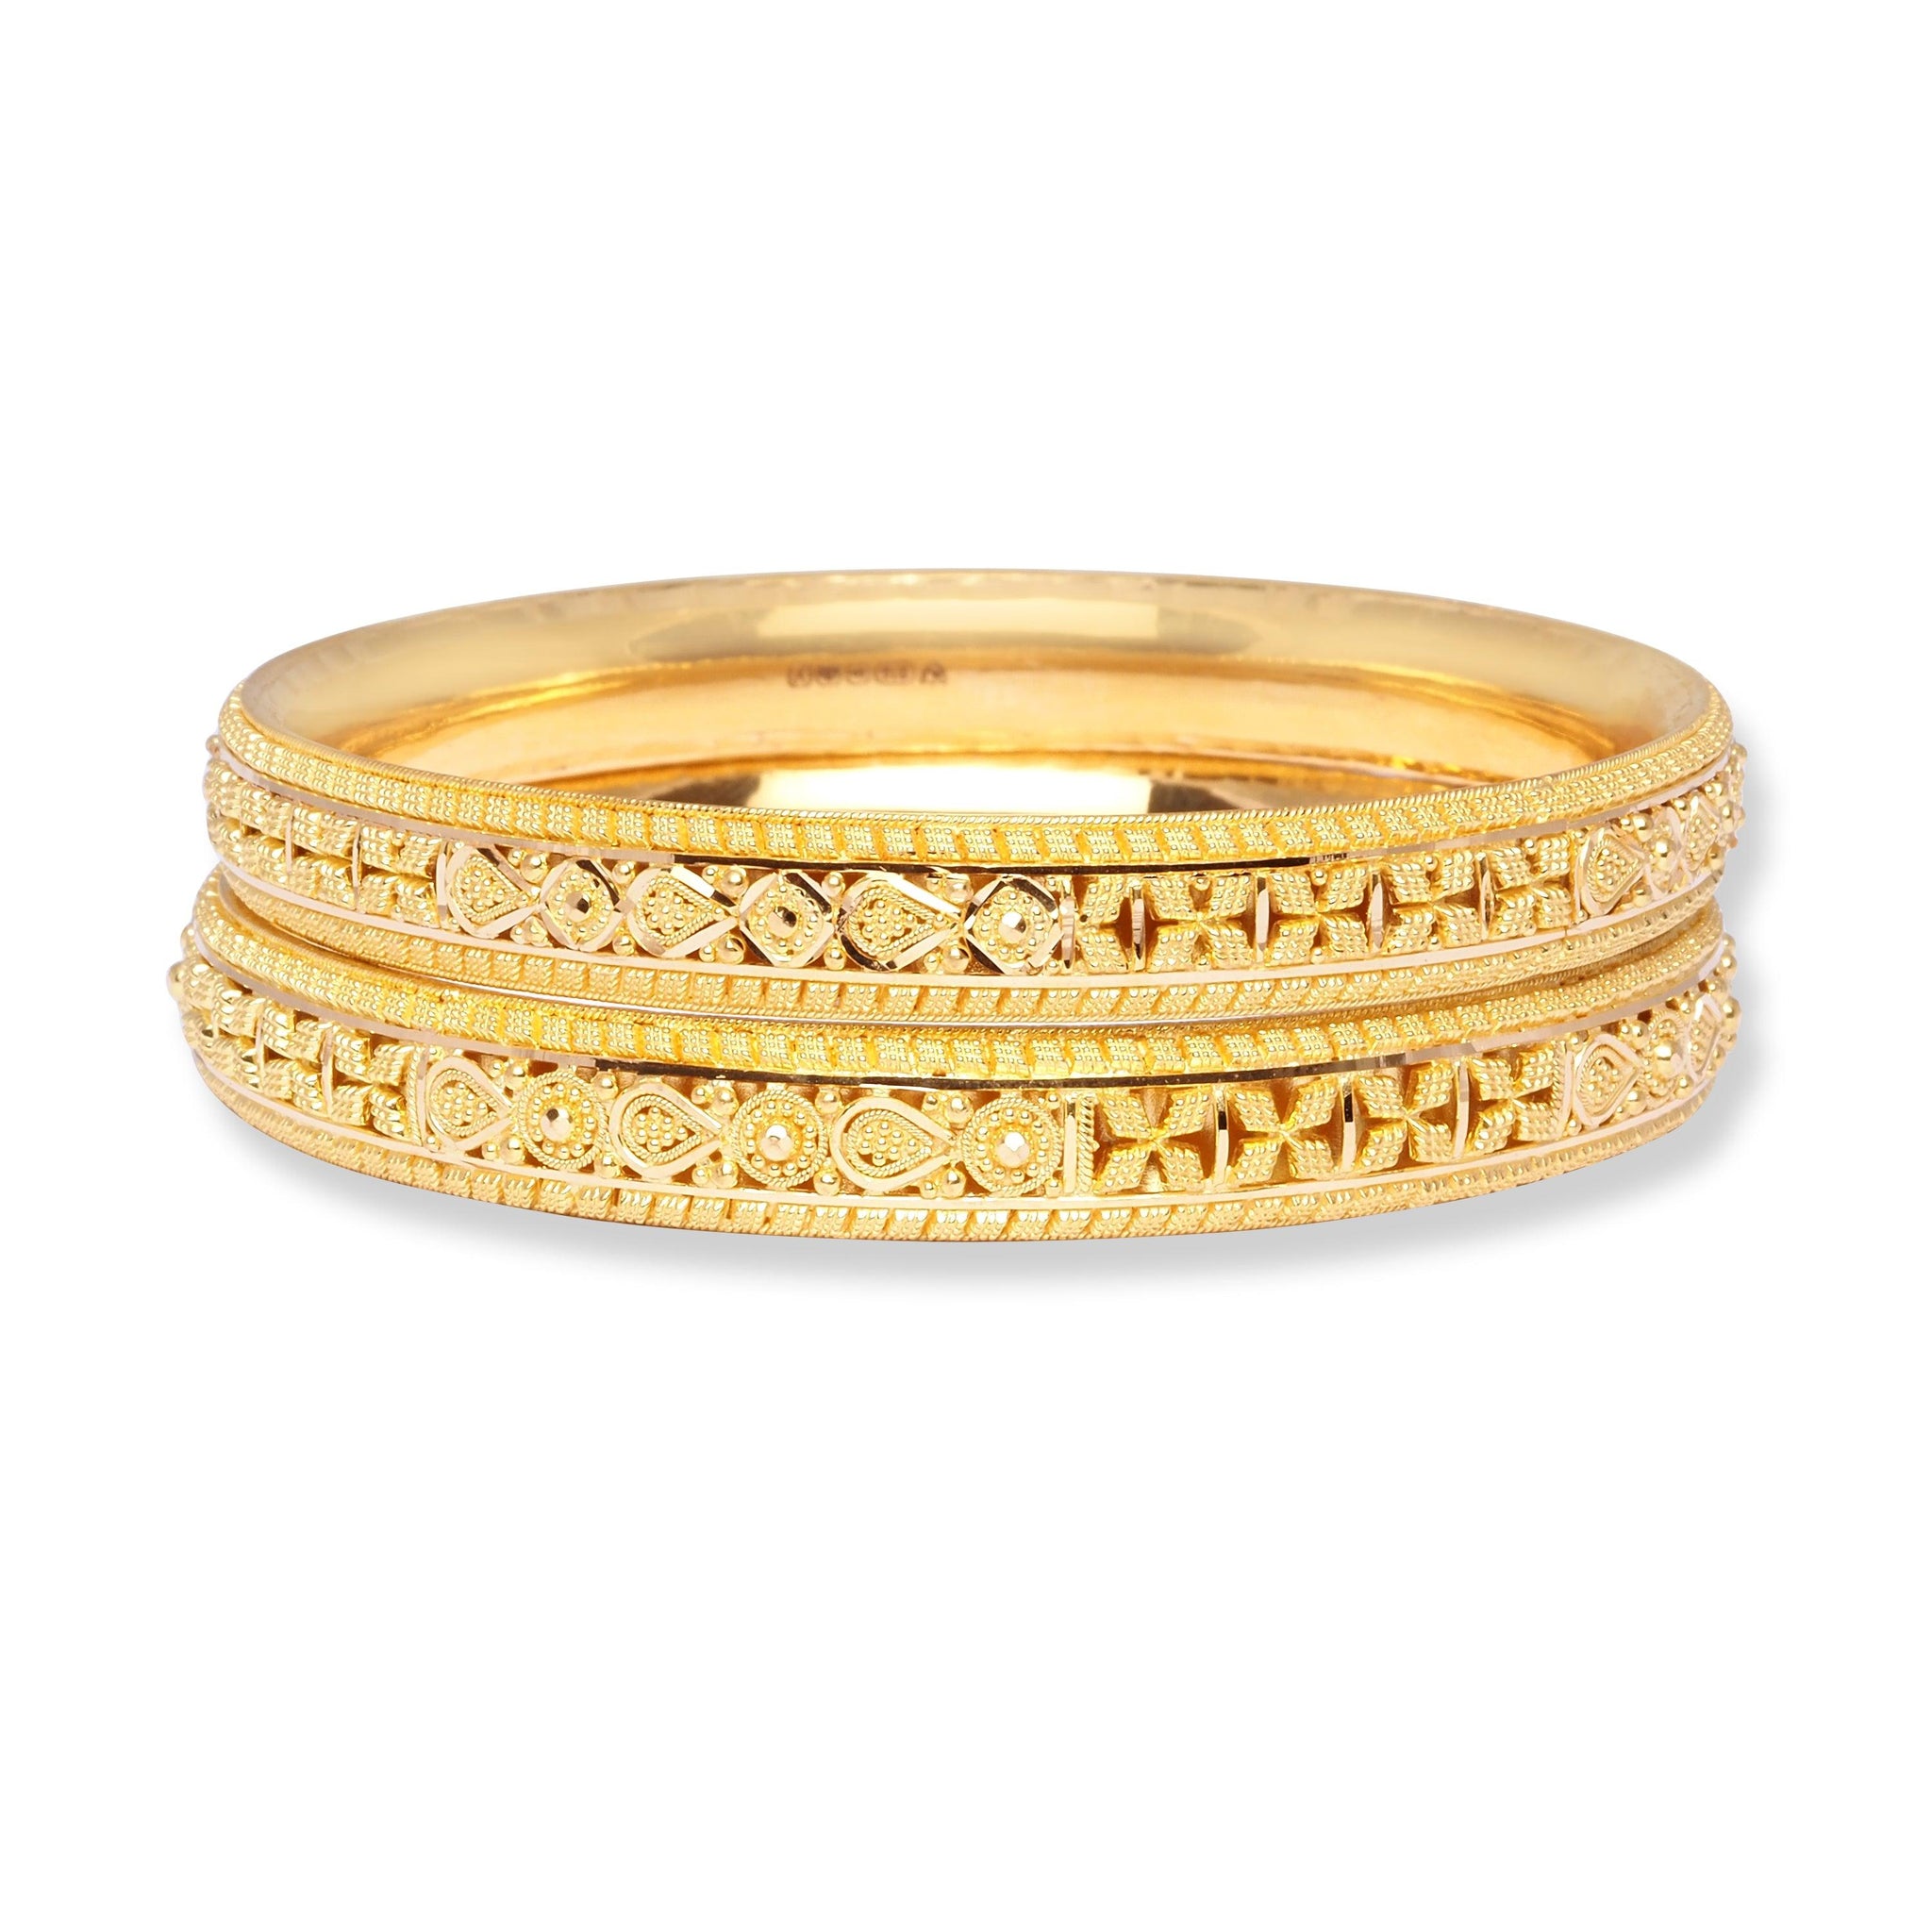 22ct Gold Pair of Bangles with Filigree Work & Comfort fit FinishB-8555